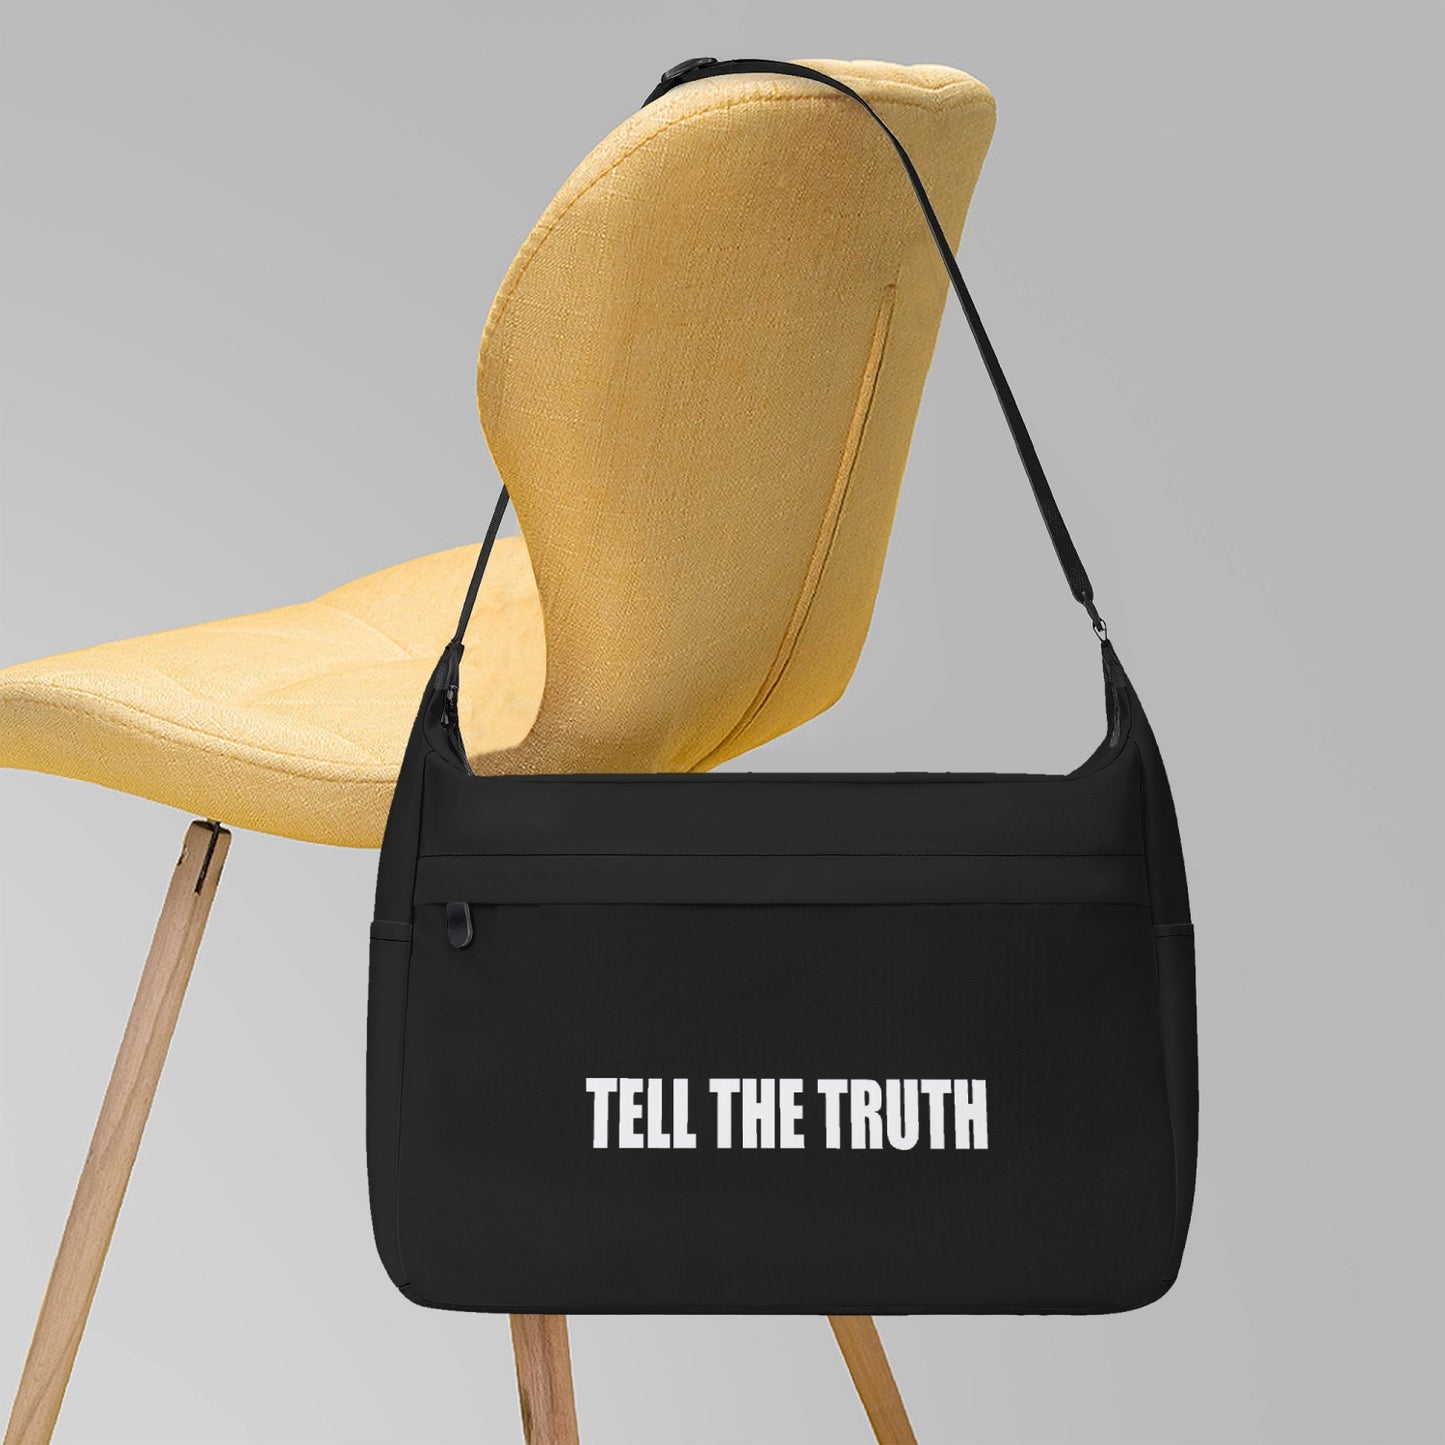 TELL THE TRUTH NEW MESSAGER BAG